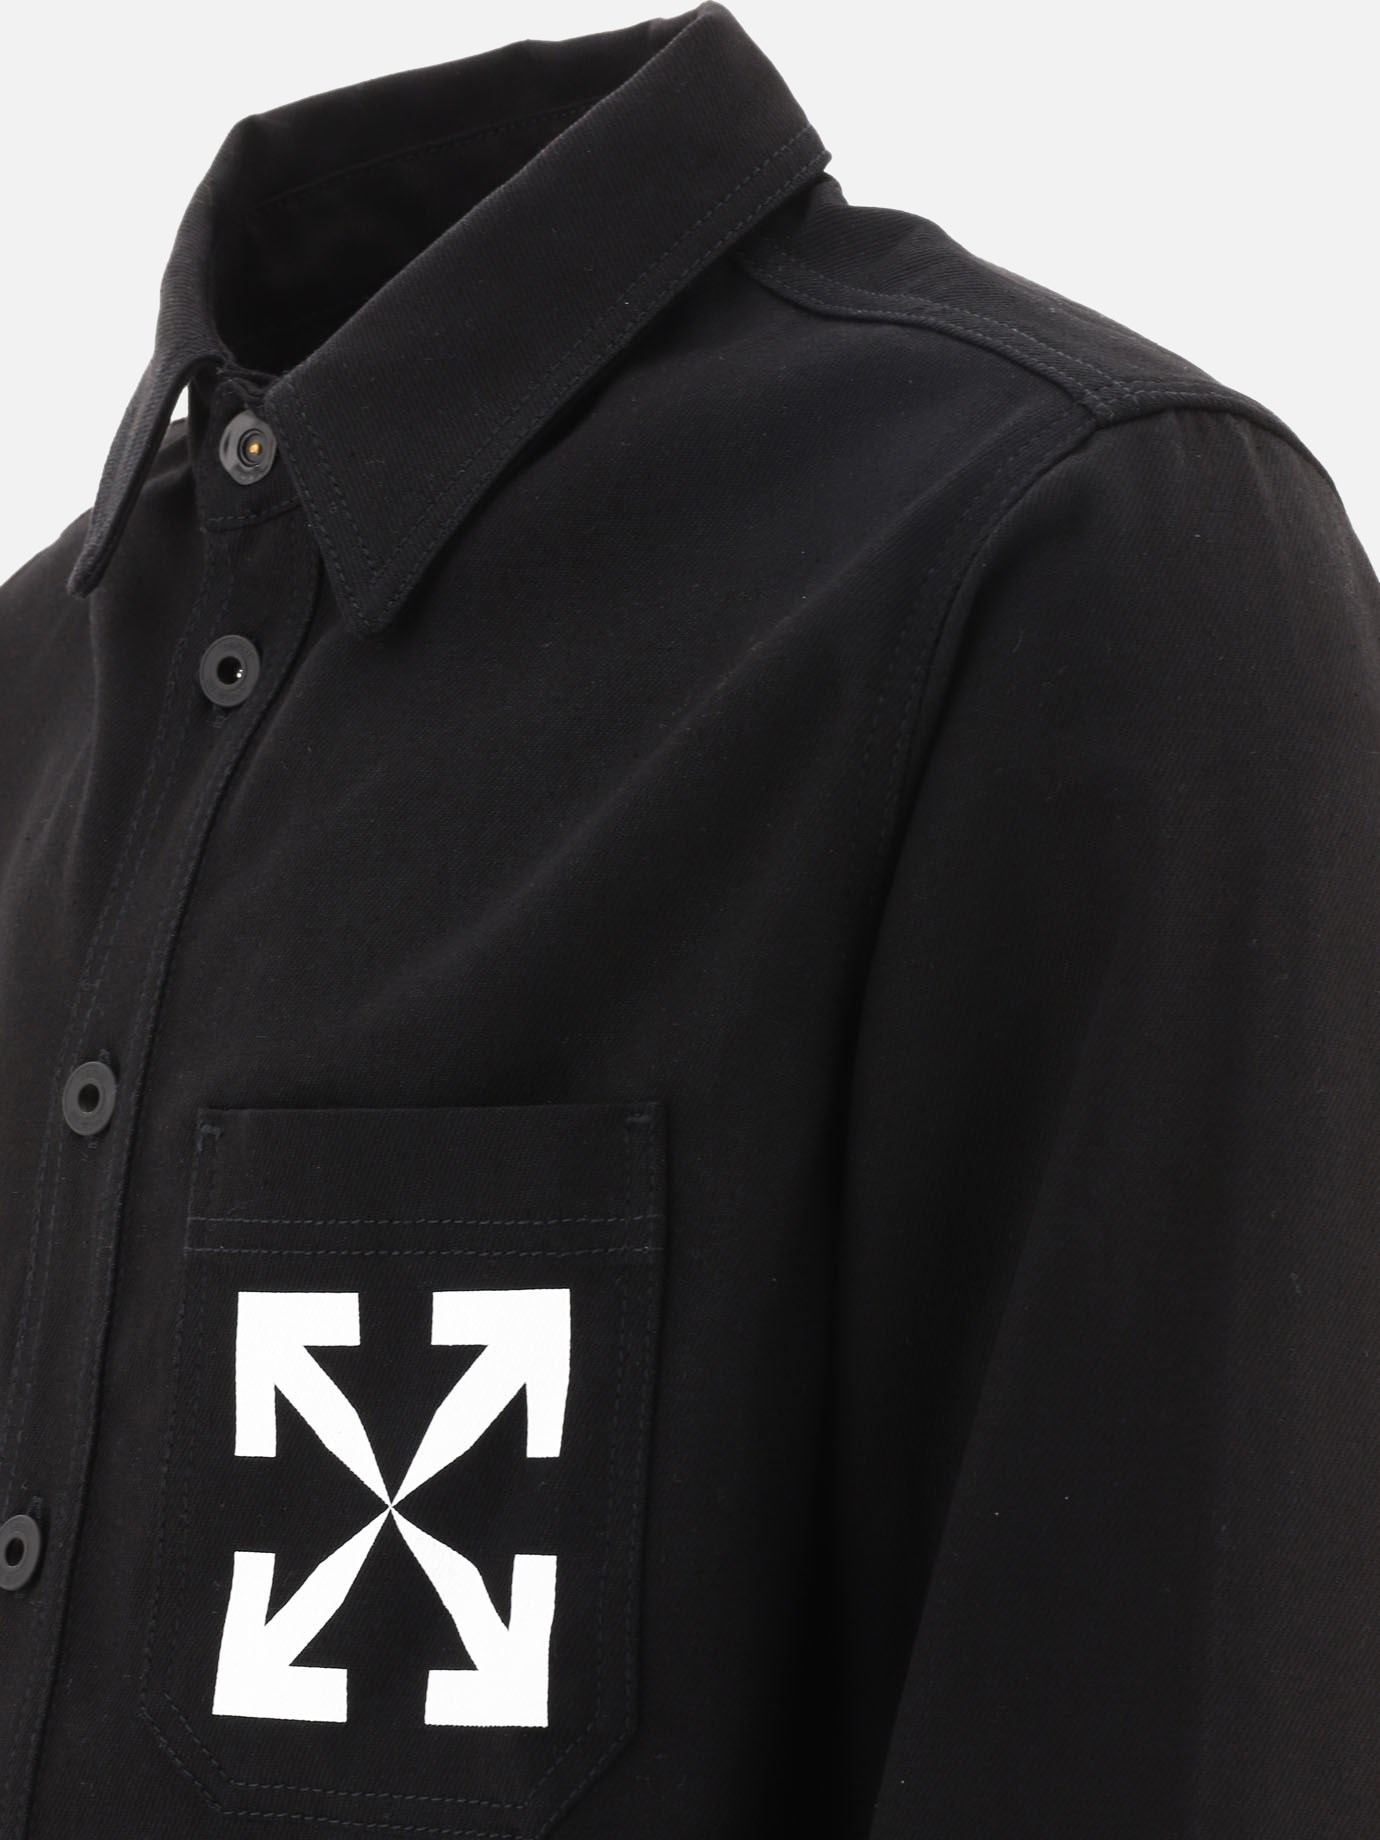 Overshirt  Single Arrow  by Off-White